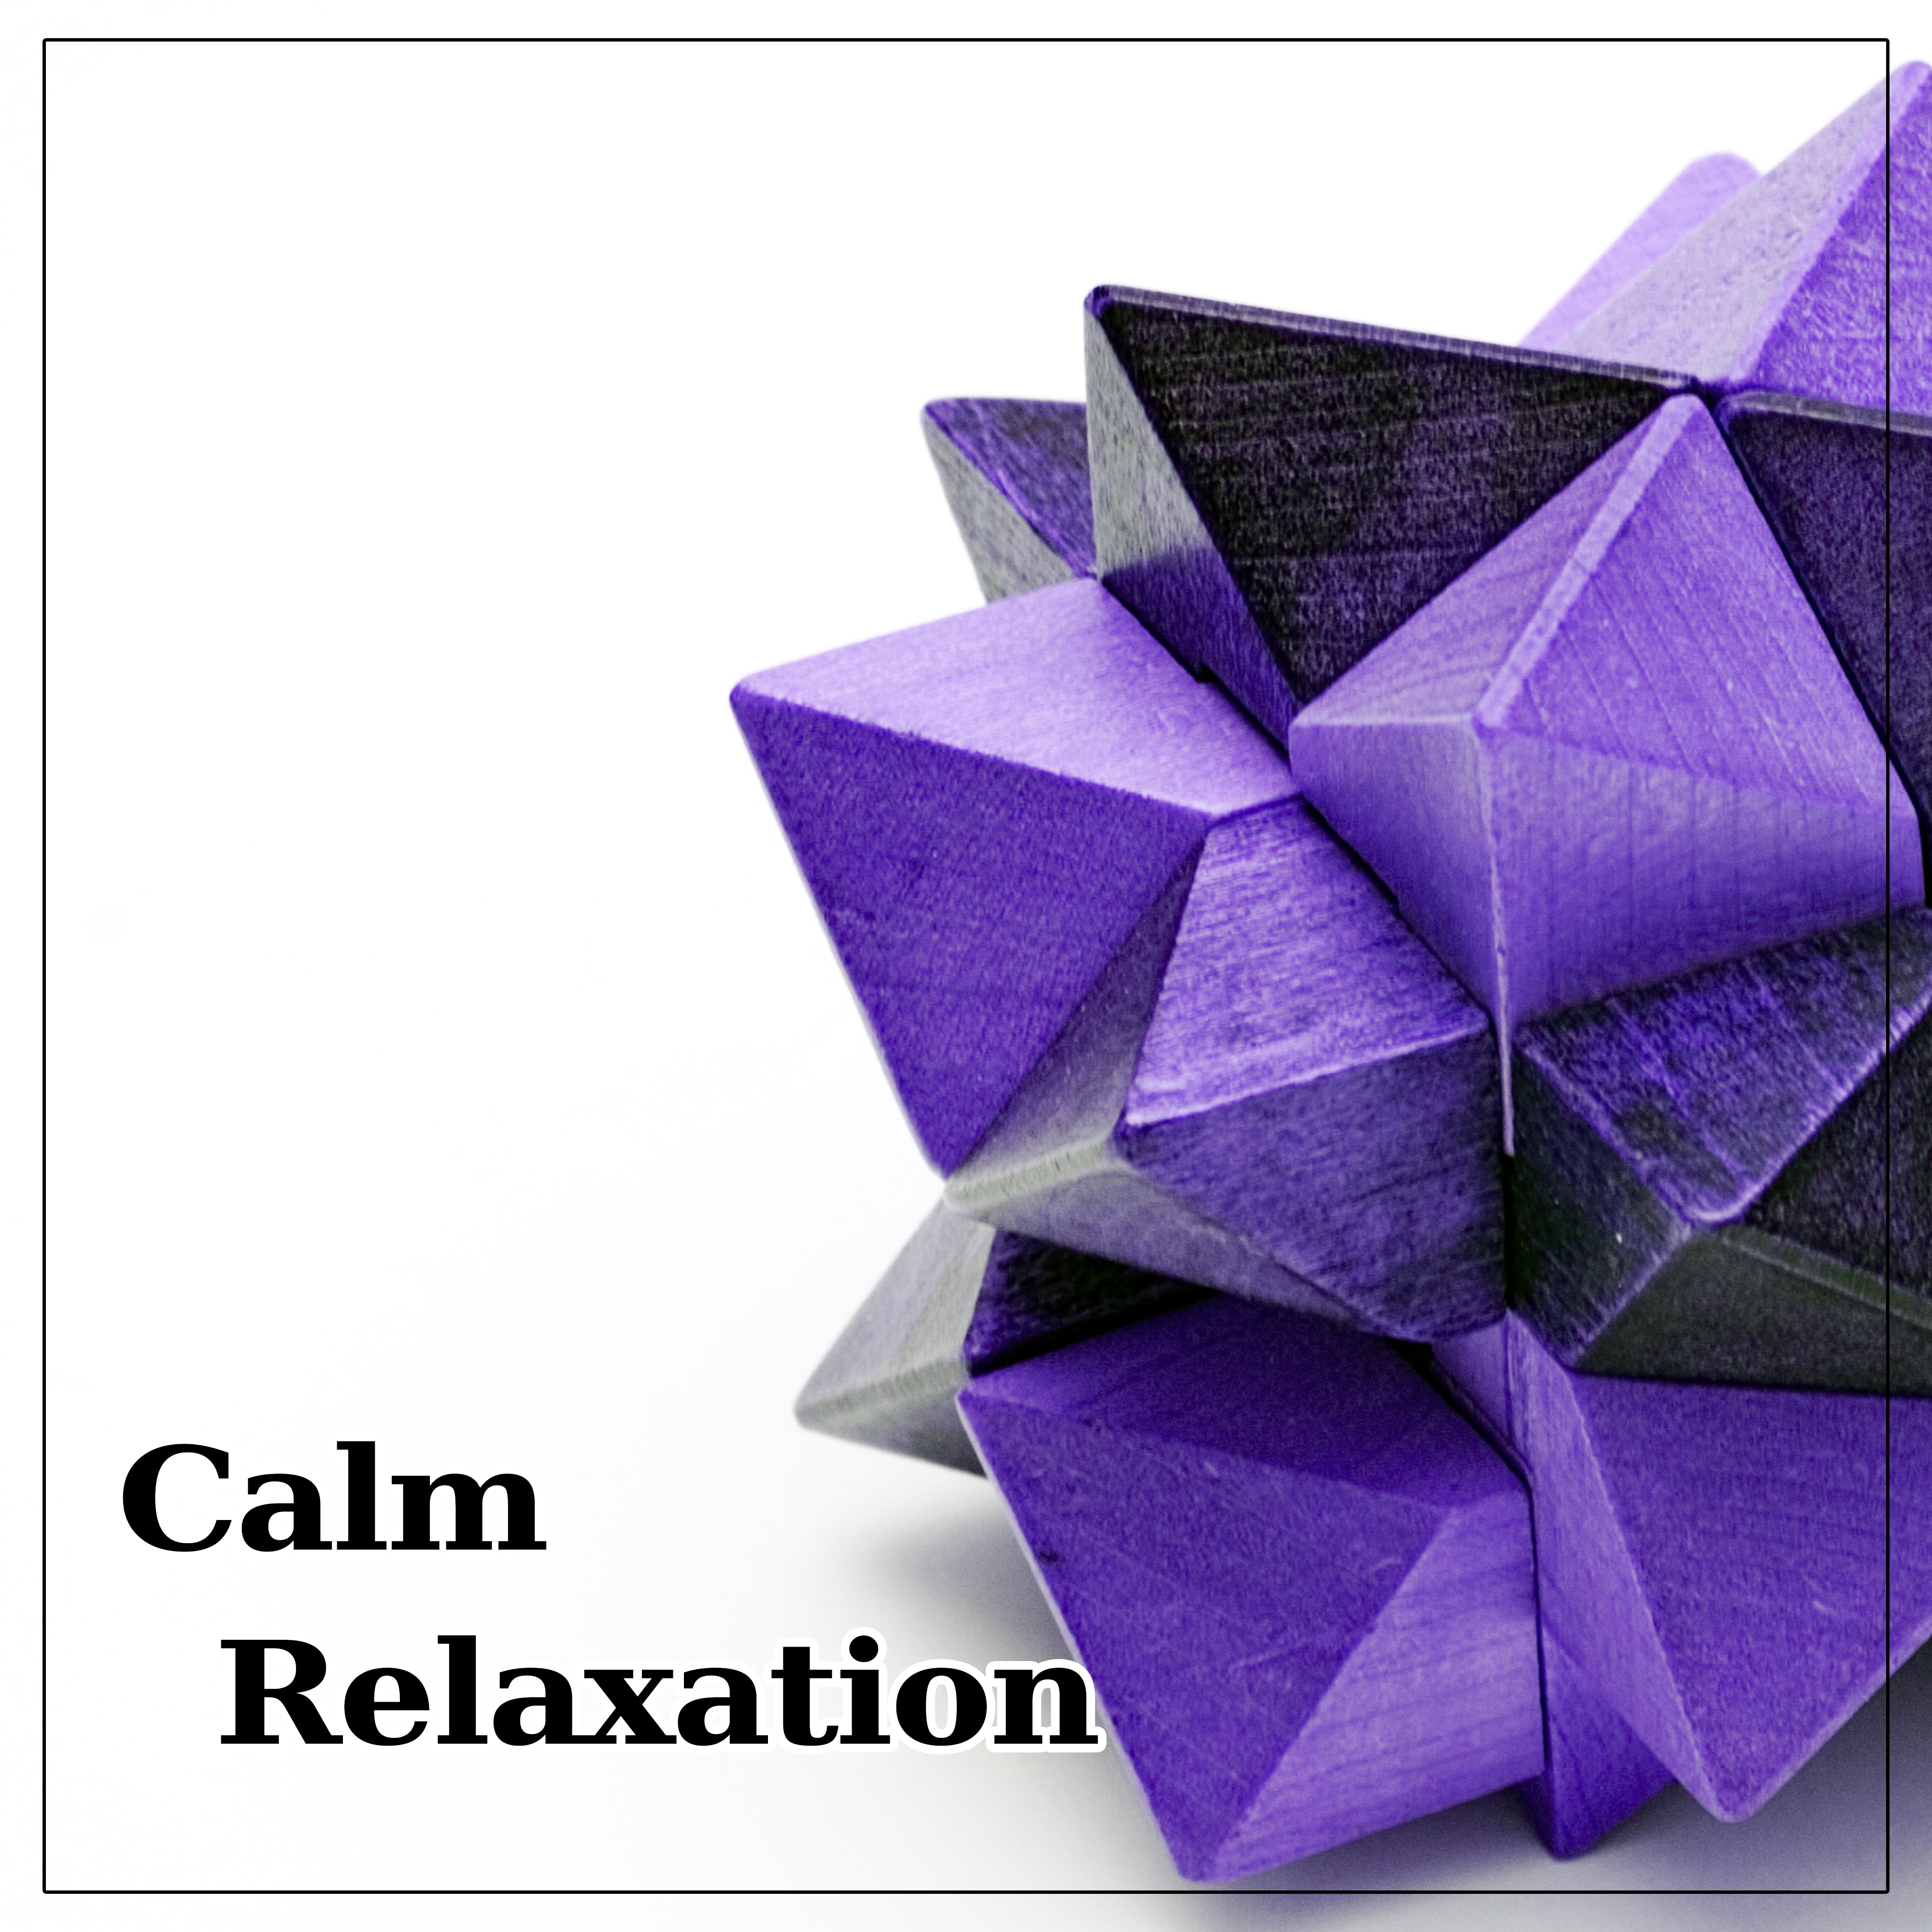 Calm Relaxation – Natural Recovery, Deep Serenity, Balancing Body, Pure Calm, Spa